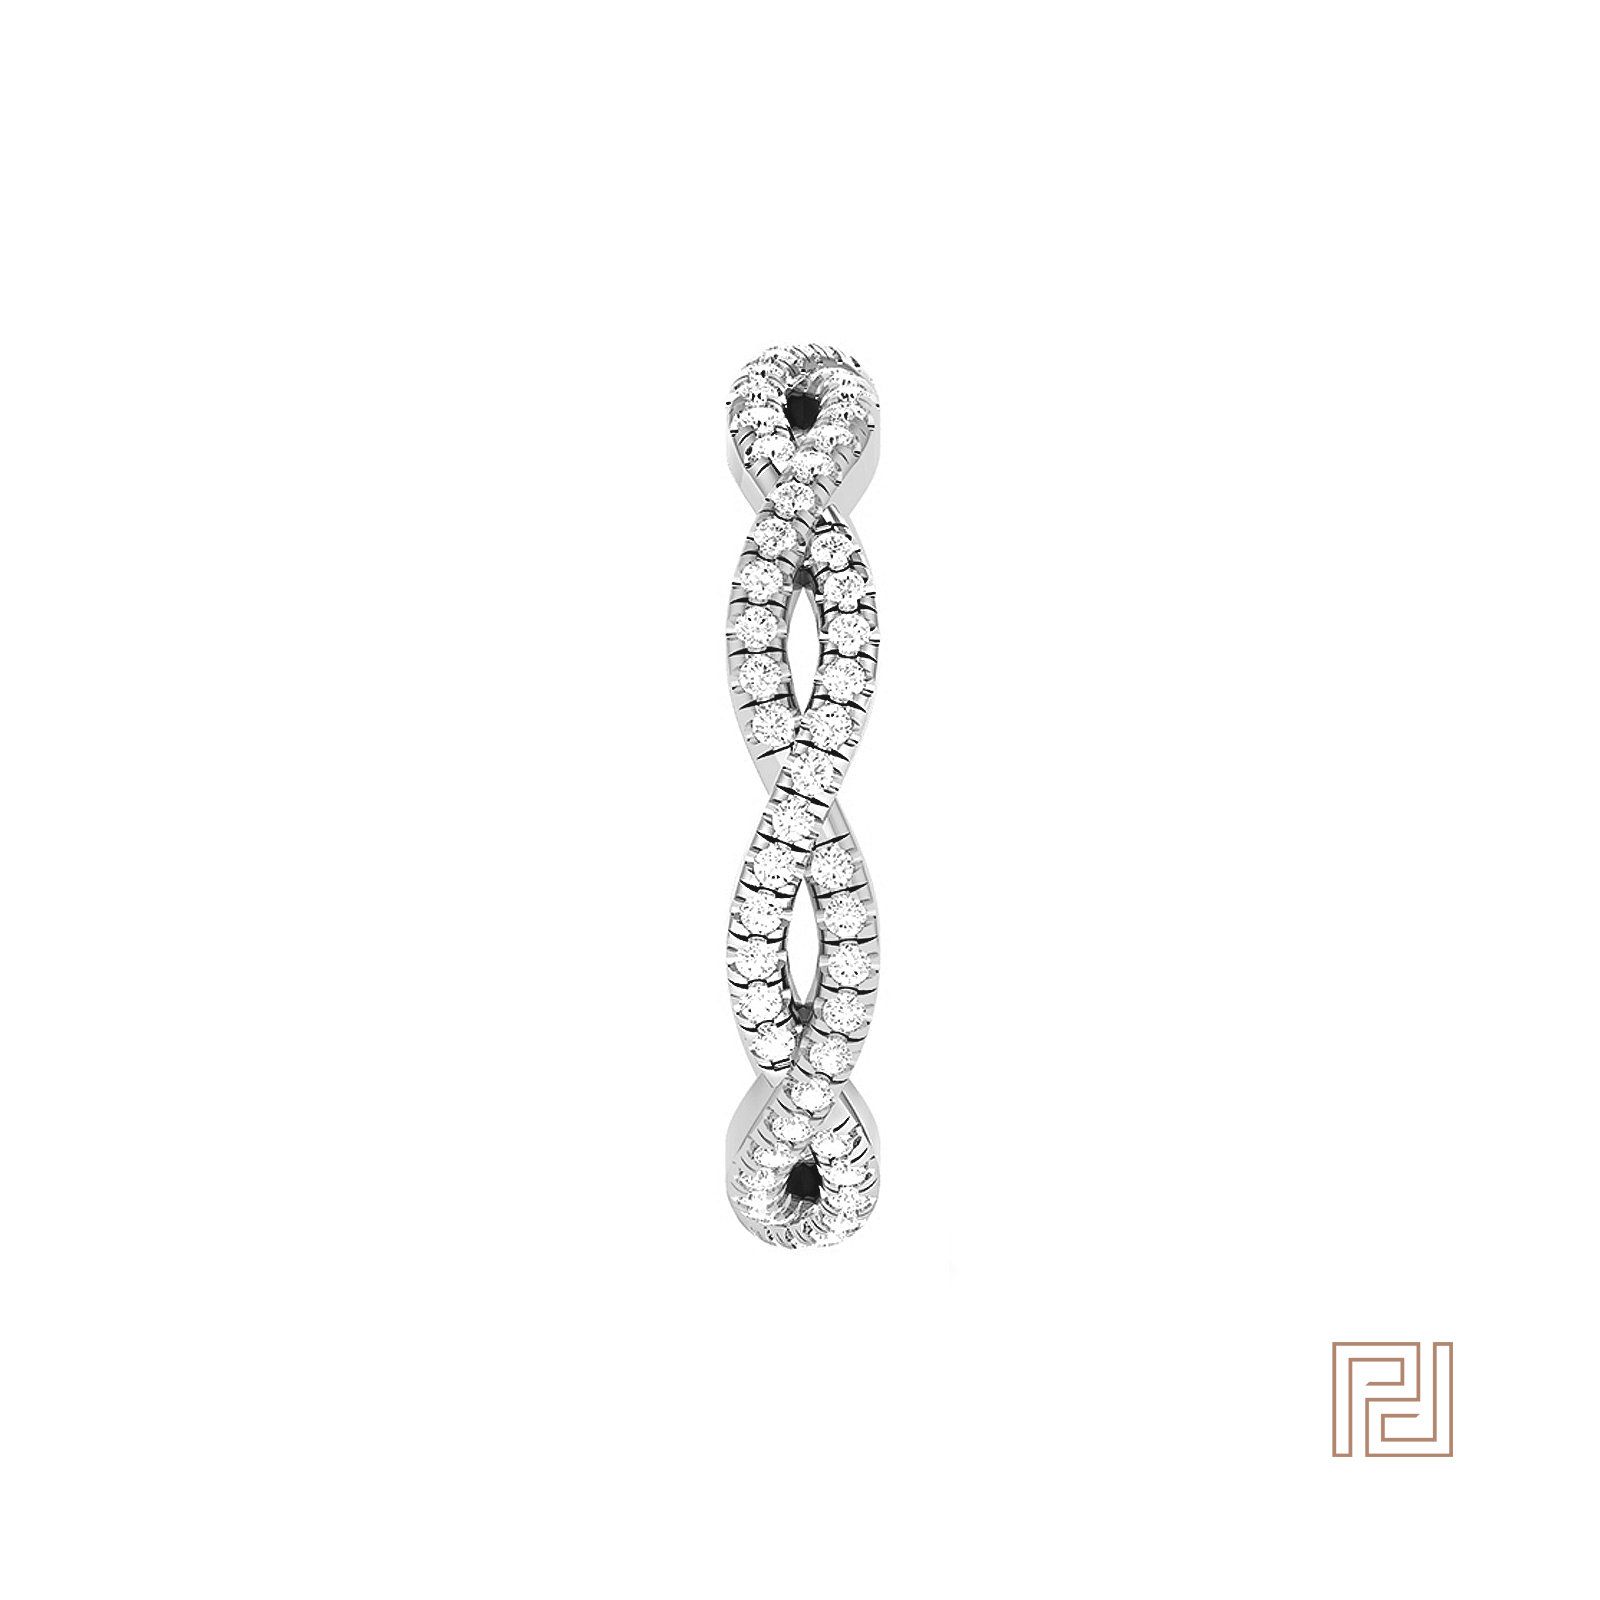 Platinum Pavé Infinity Ring | Pugata Jewellery For Bubbles Infinity Diamond Pave Rings (View 19 of 25)